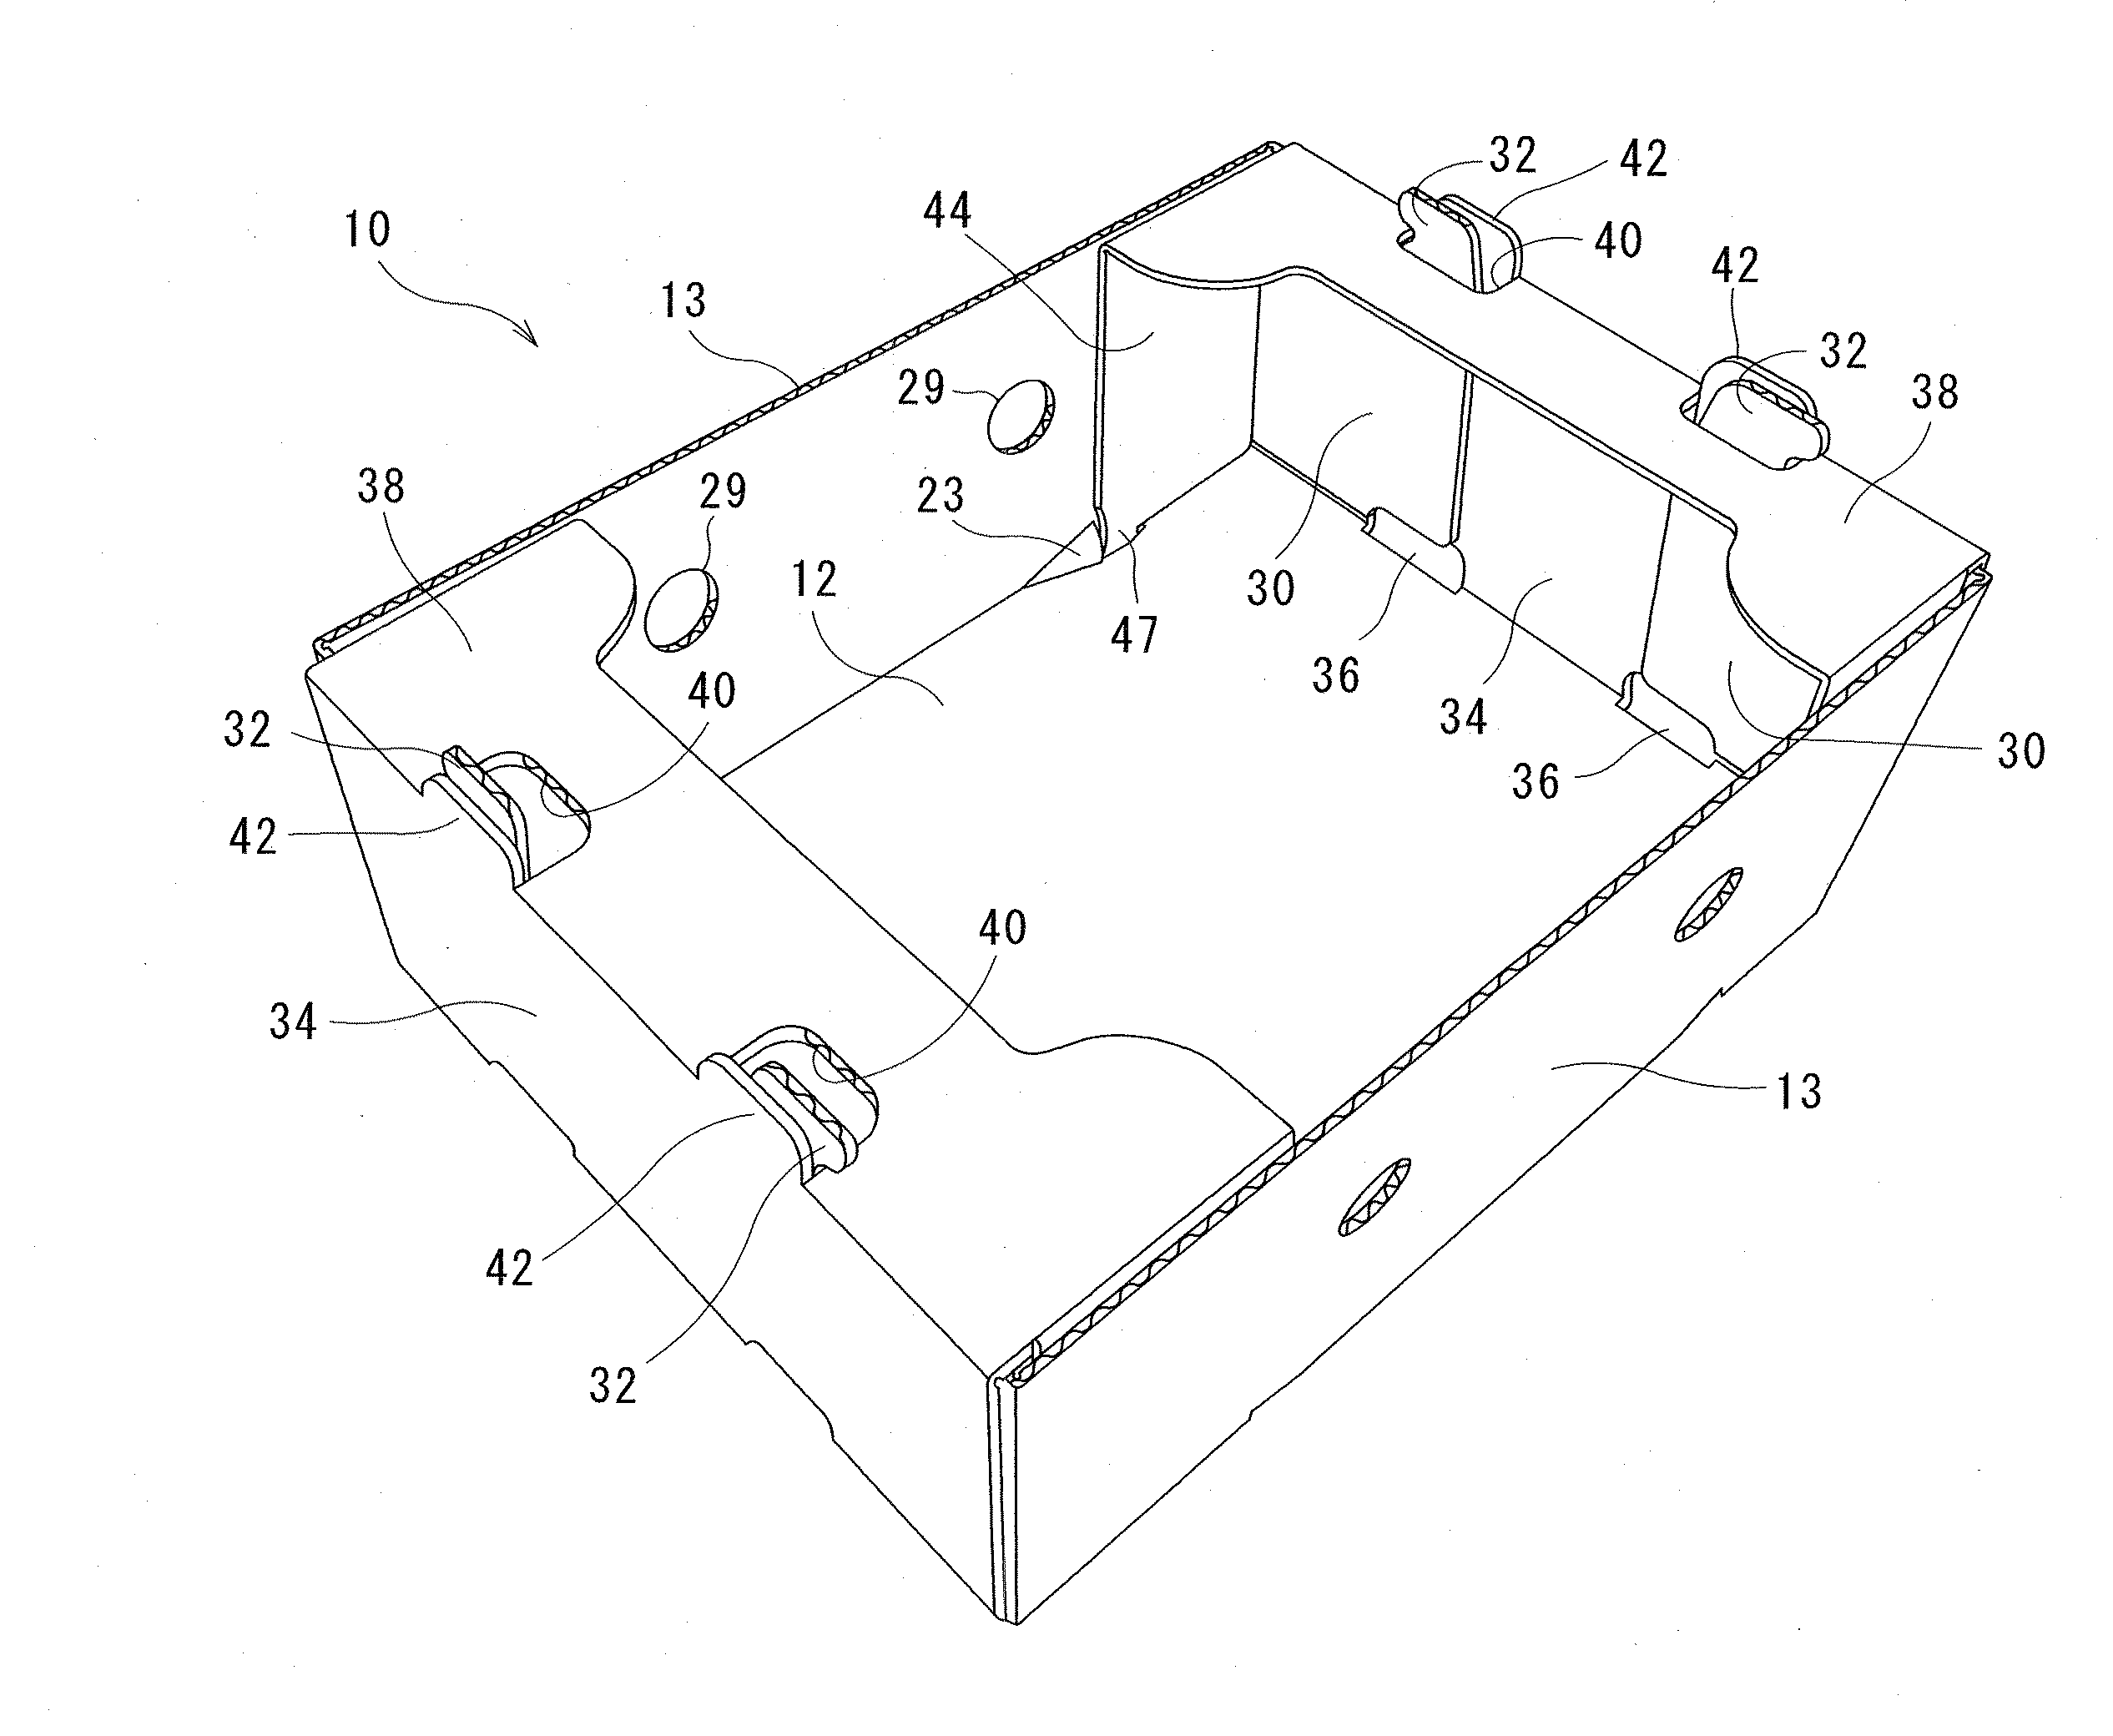 Locking structure, container utilizing locking structure, and container assembling apparatus